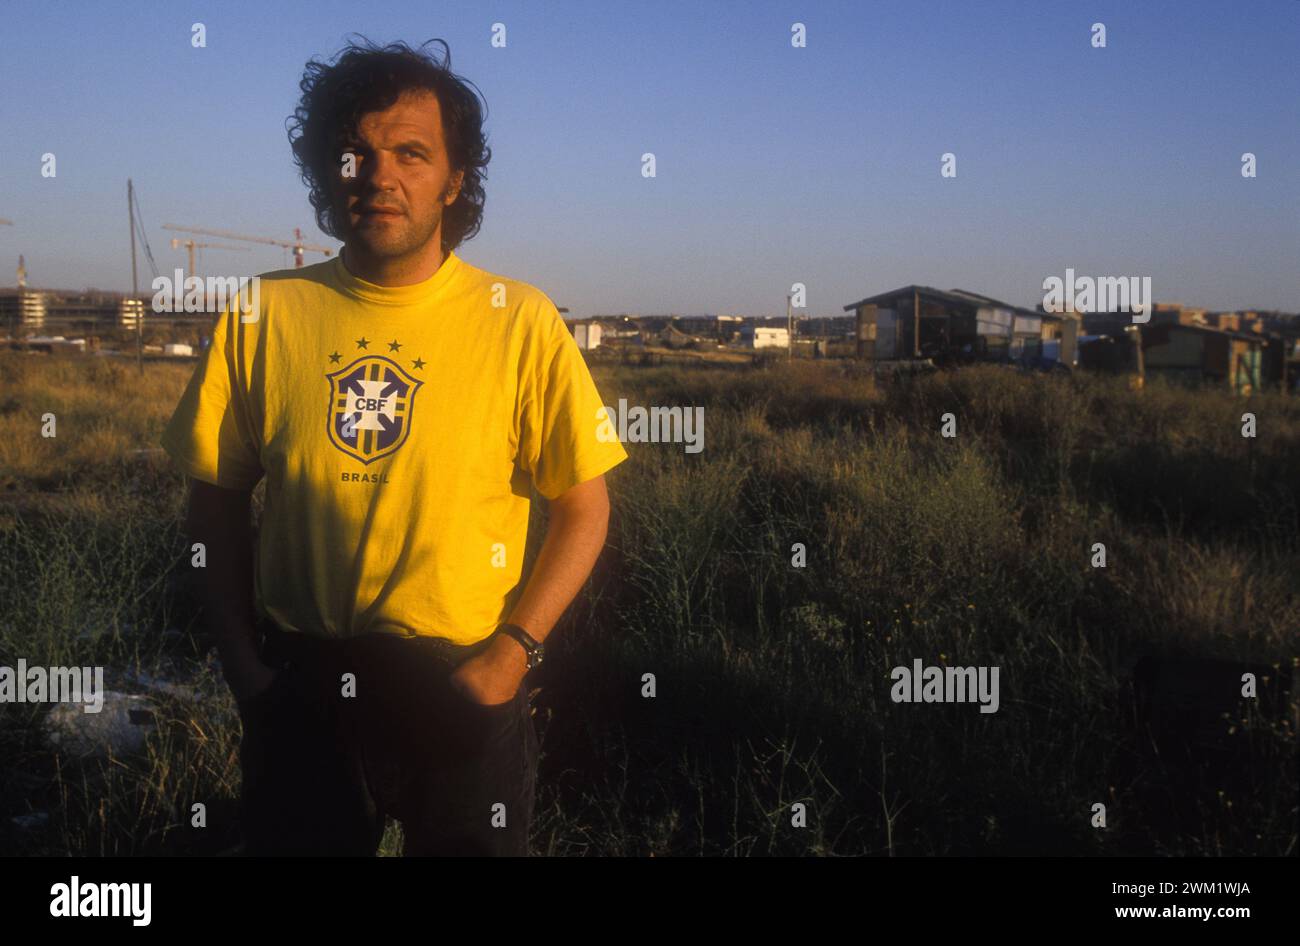 MME4733836 Rome, 1999. Serbian director Emir Kusturica visits the Casilino 700 gipsy camp/Roma, 1999. He registered Emir Kusturica in visita al campo nomadi Casilino 700 -; (add.info.: Rome, 1999. Serbian director Emir Kusturica visits the Casilino 700 gipsy camp/Roma, 1999. He registered Emir Kusturica in visita al campo nomadi Casilino 700 -); © Marcello Mencarini. All rights reserved 2024. Stock Photo